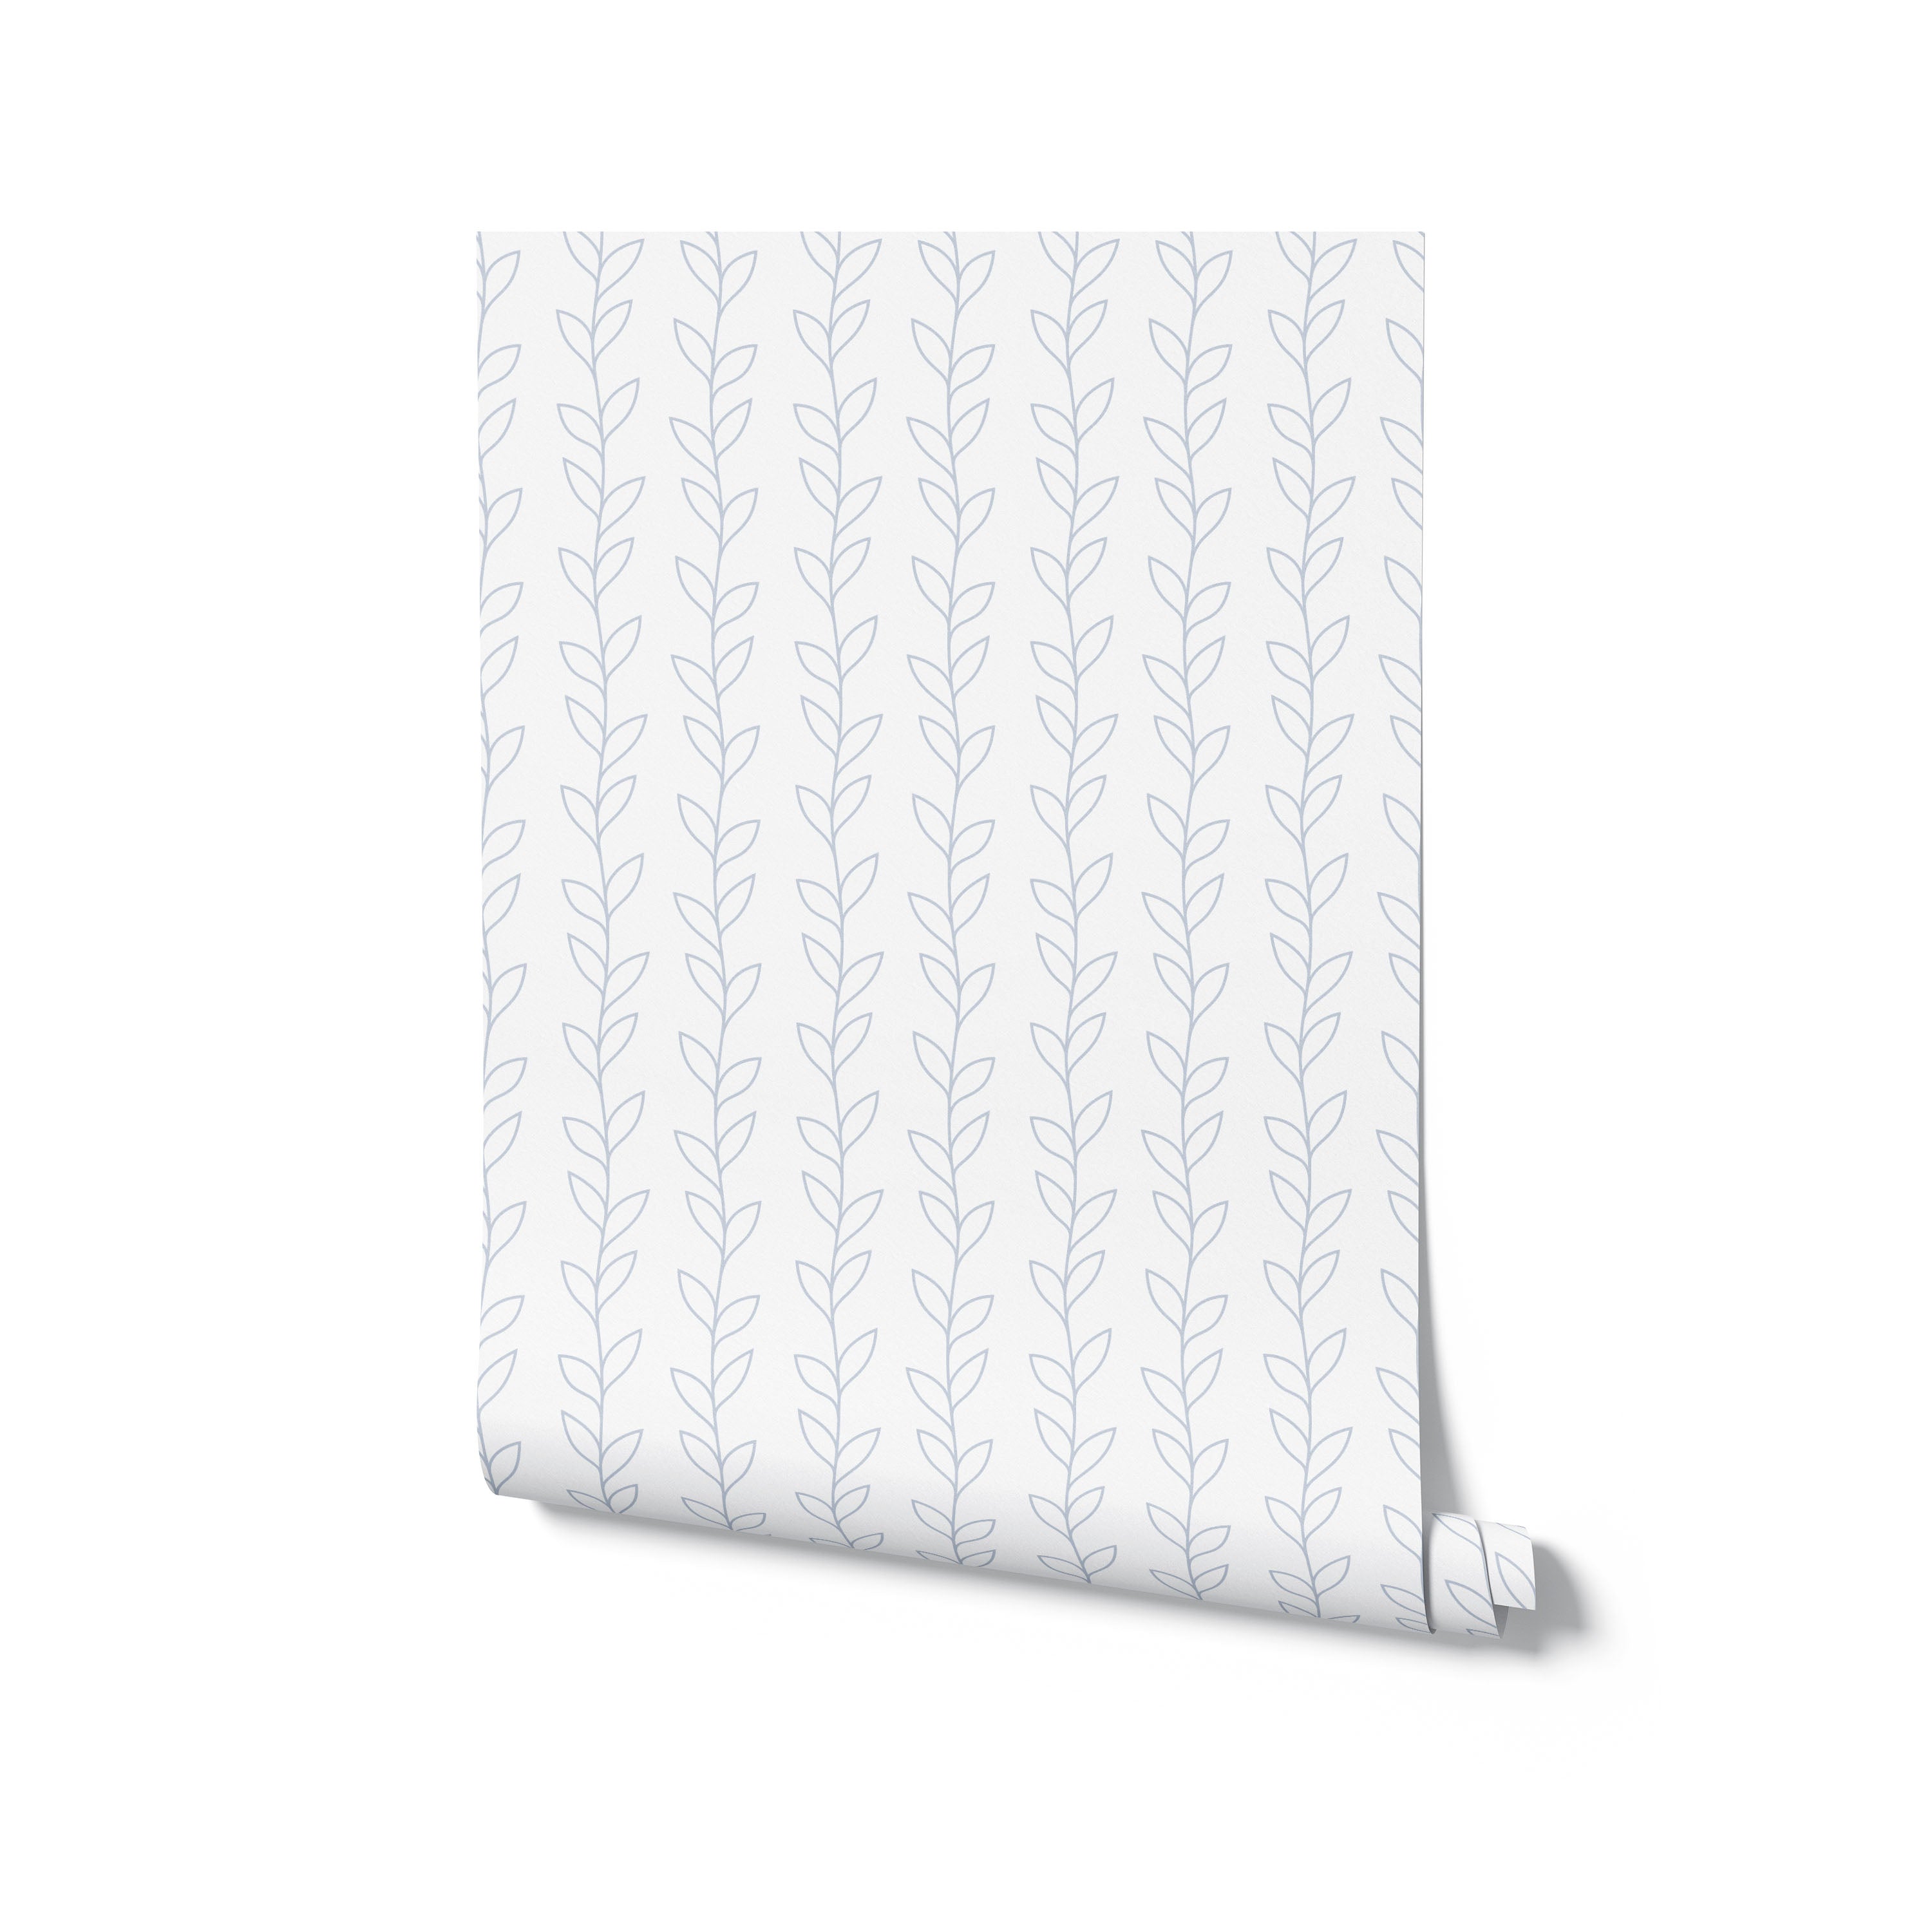 Natural Wallpaper Roll with Simple Leaf Patterns on White Background